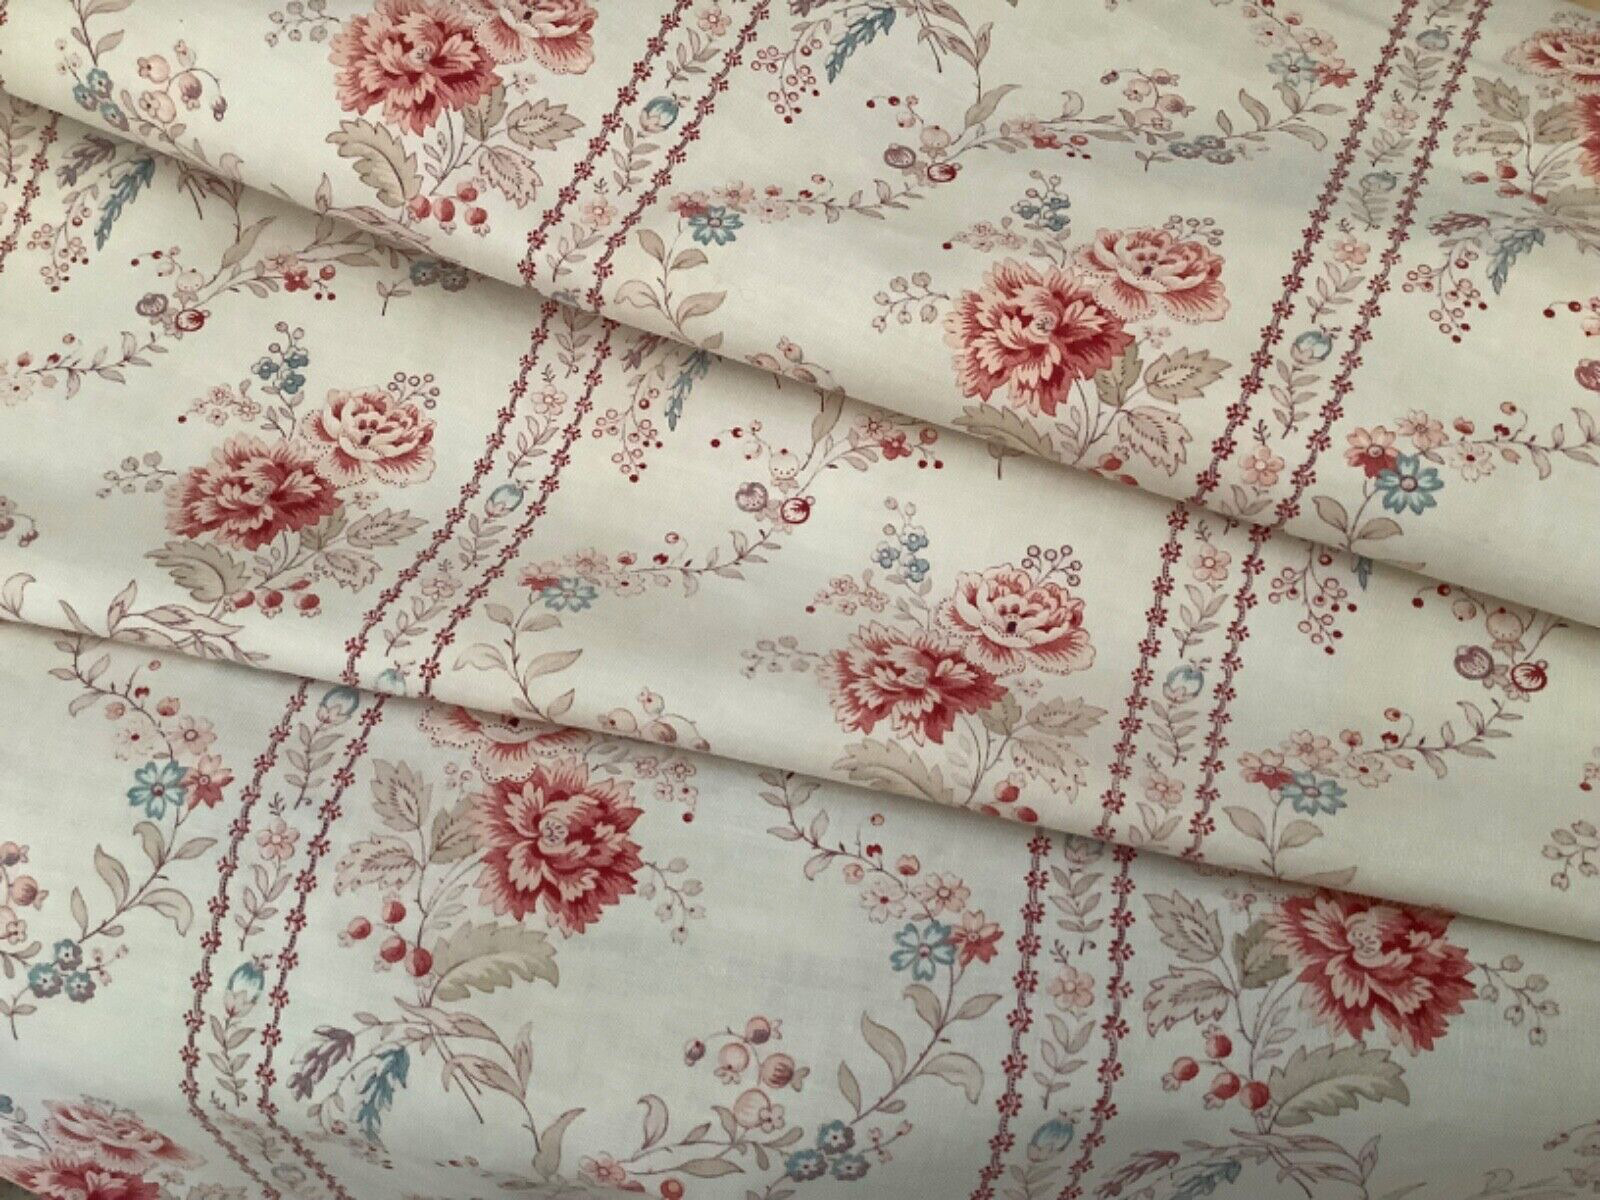 Antique French Cotton Fabric or Curtain Lovely Floral Stripe Block Print Roses